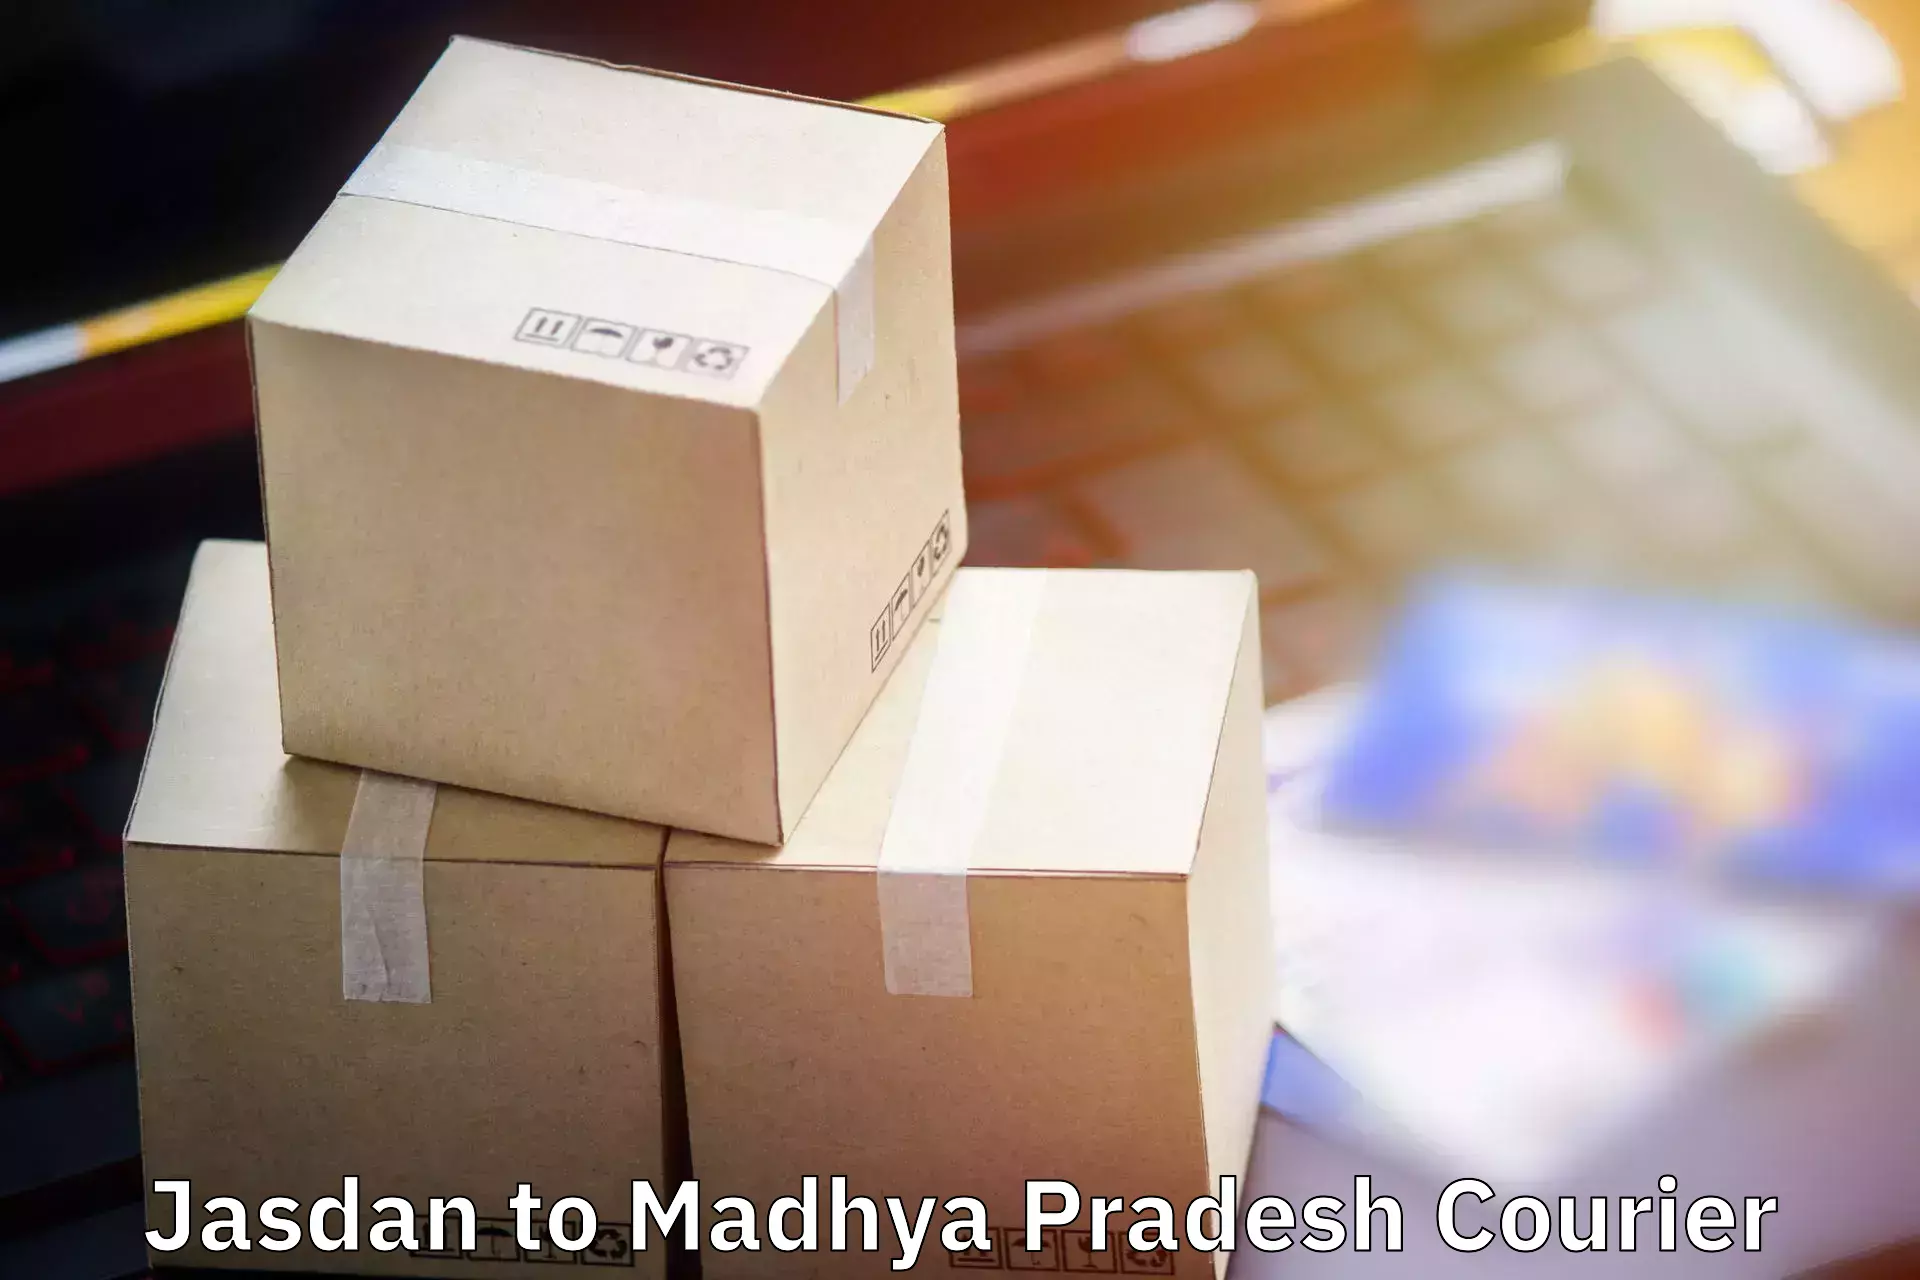 Personal effects shipping Jasdan to Jirapur